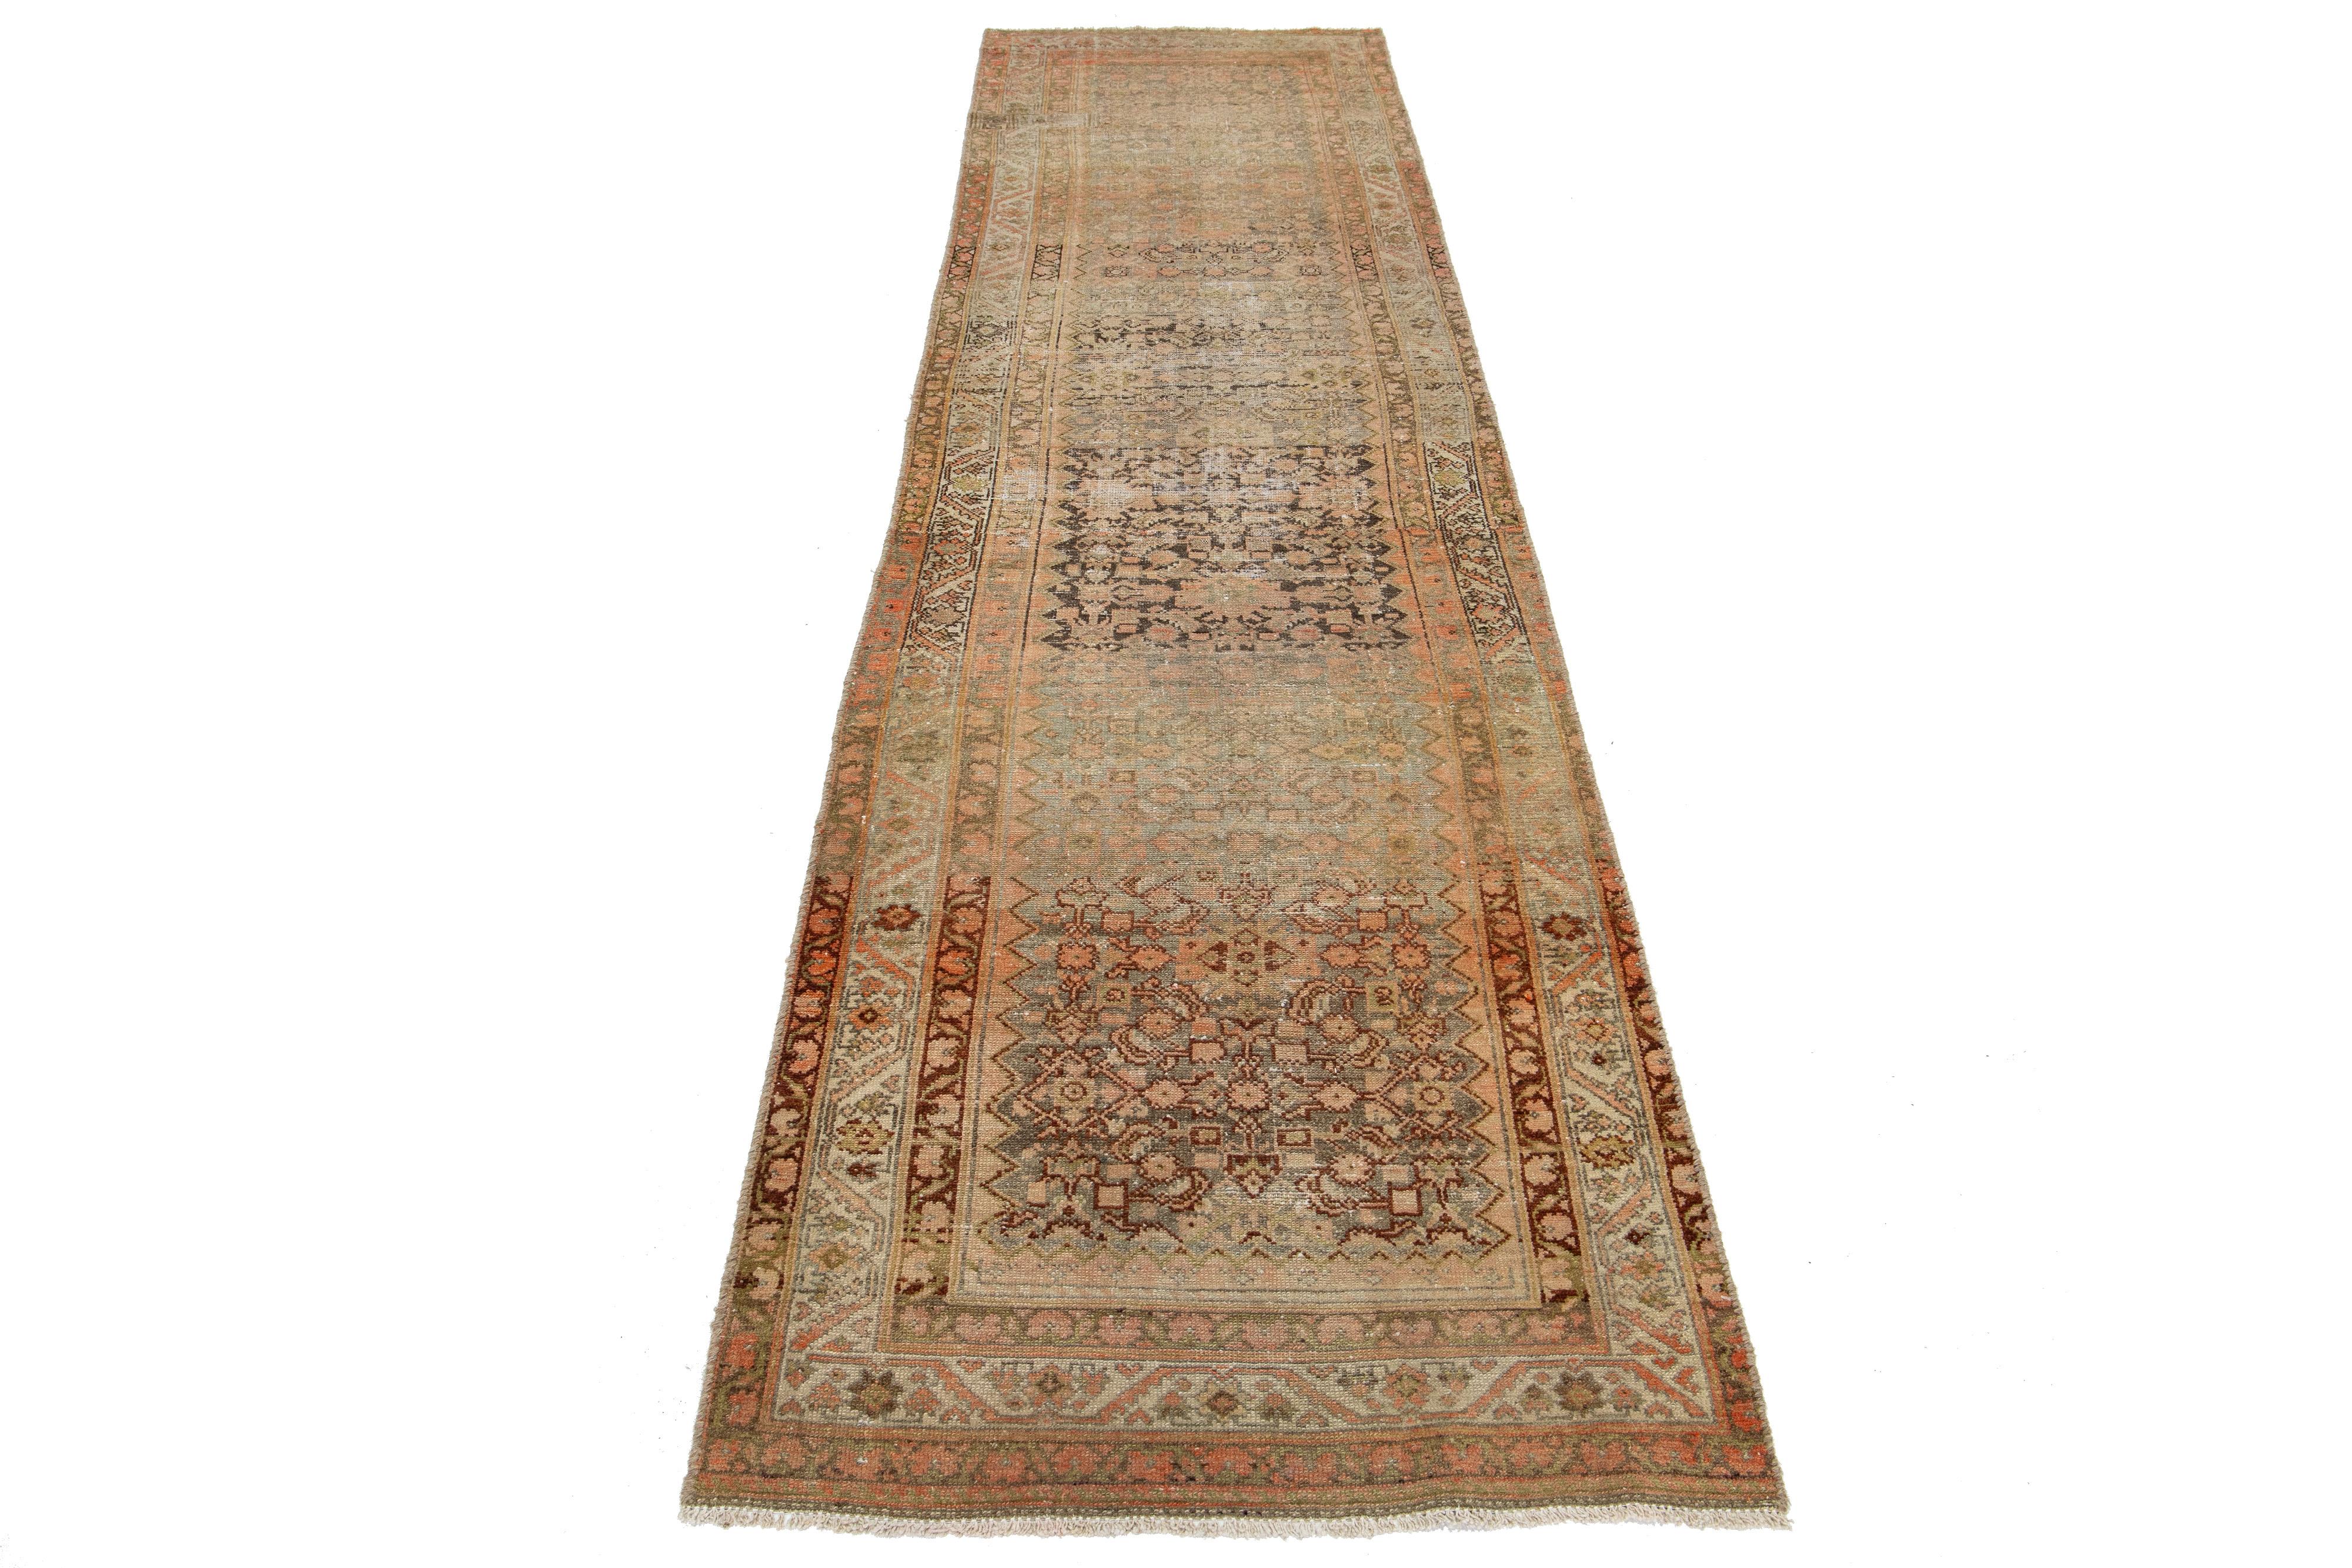 This is a handmade Persian Malayer wool runner from the 20th century. The design features a peach field with brown, yellow, and gray accents.

This rug measures 3' X 11'10